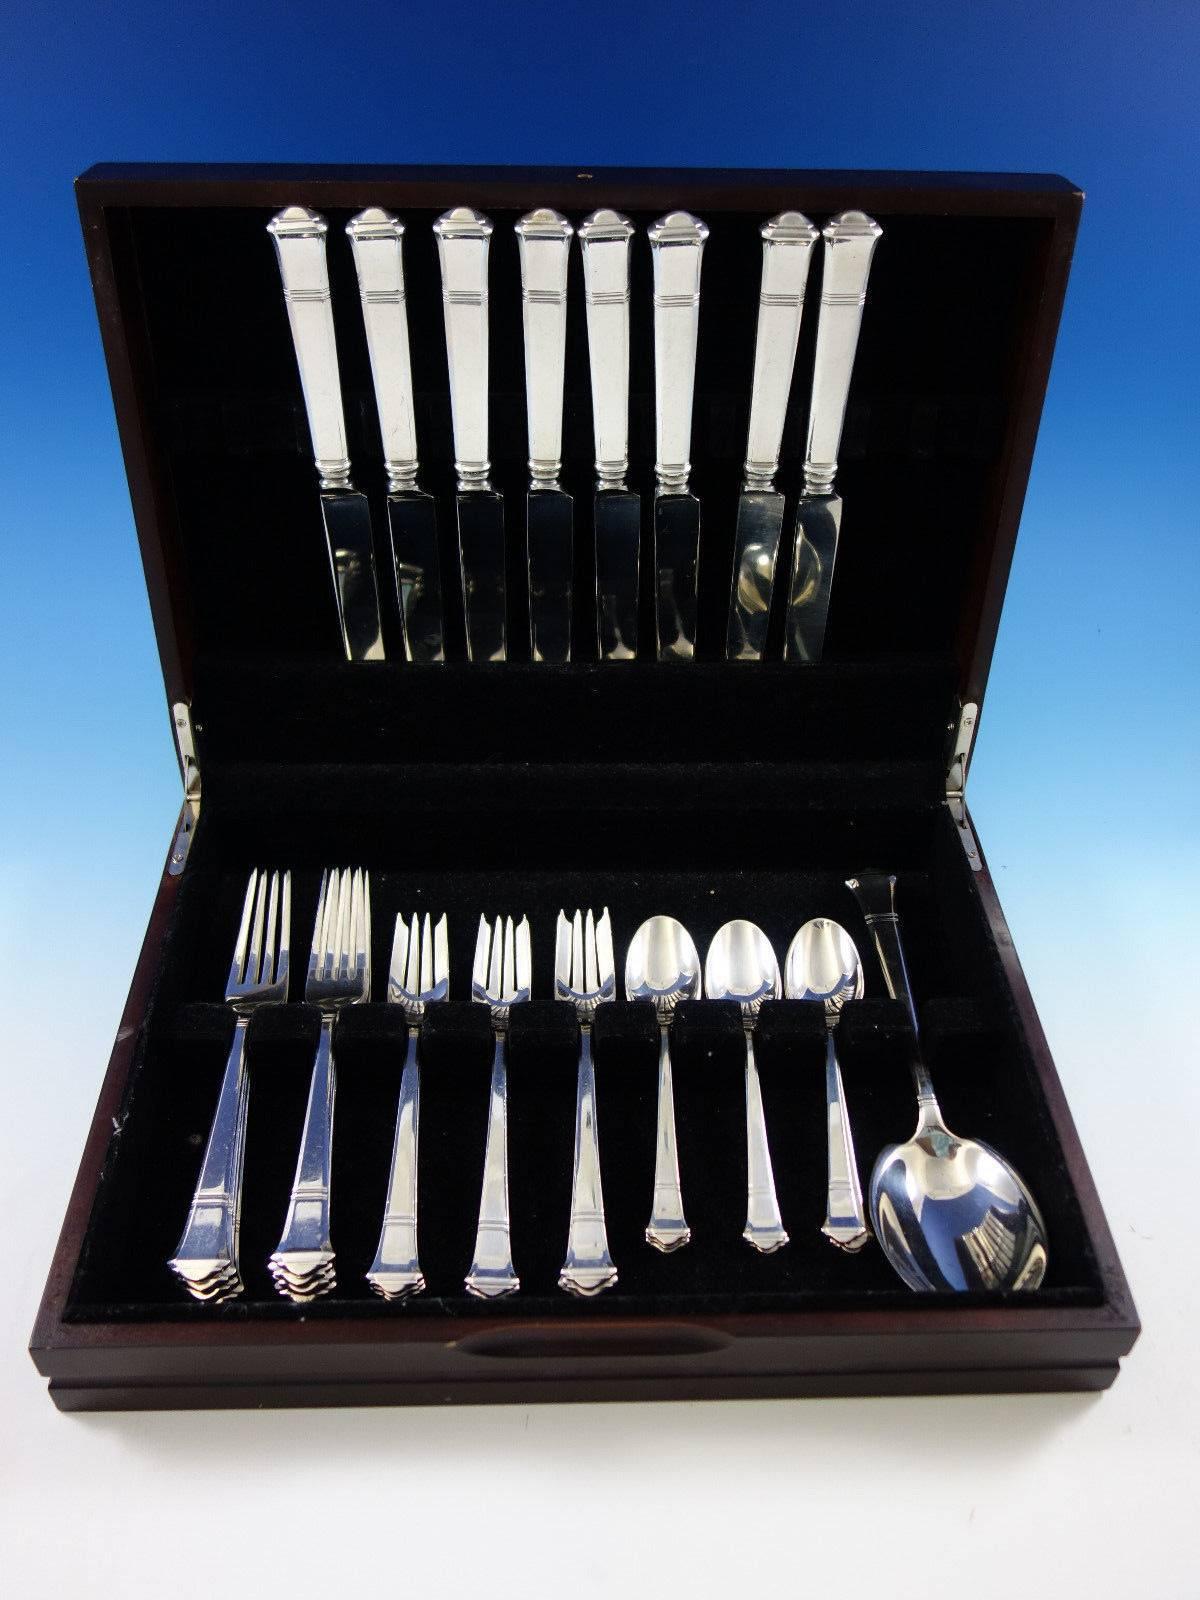 This set includes:

Eight dinner size knives, 10 1/4